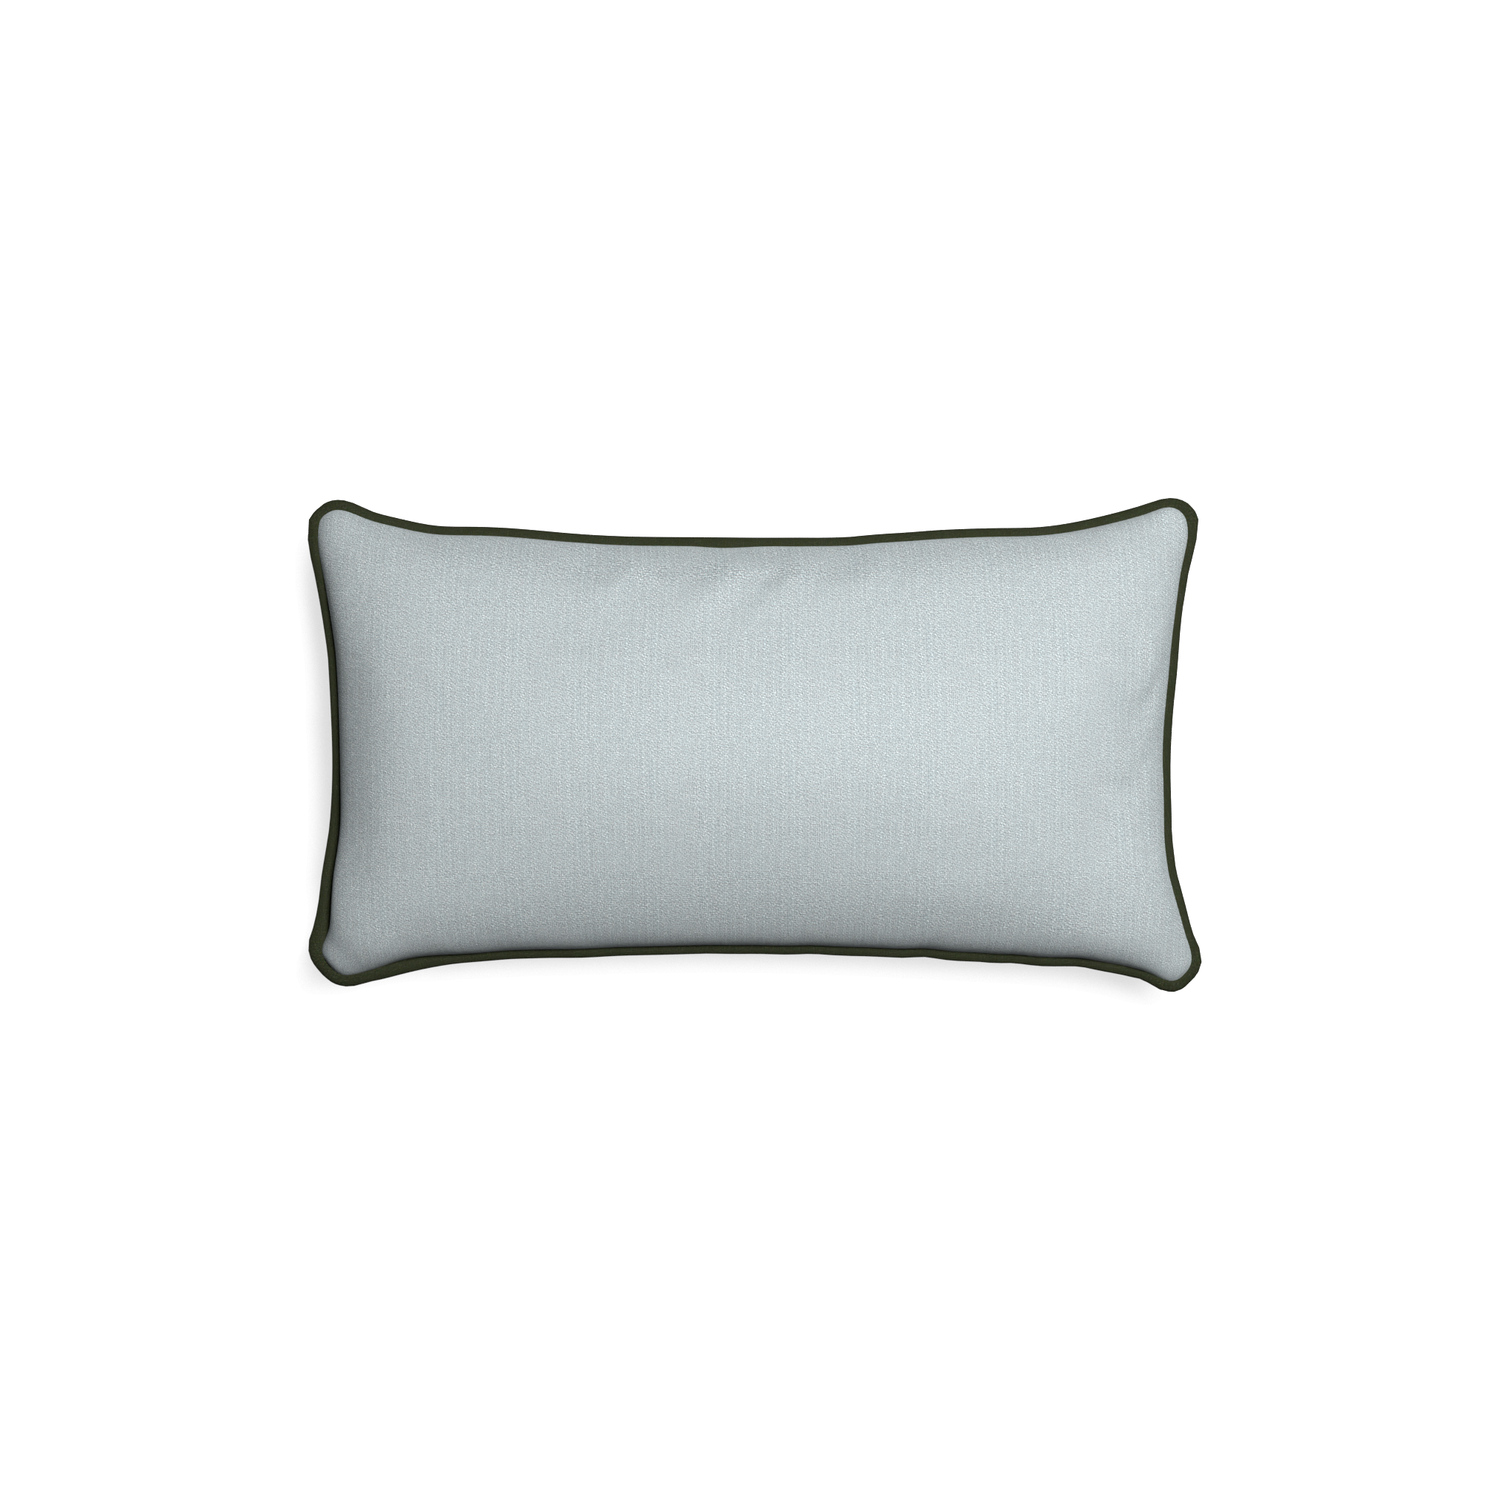 Petite-lumbar sea custom grey bluepillow with f piping on white background